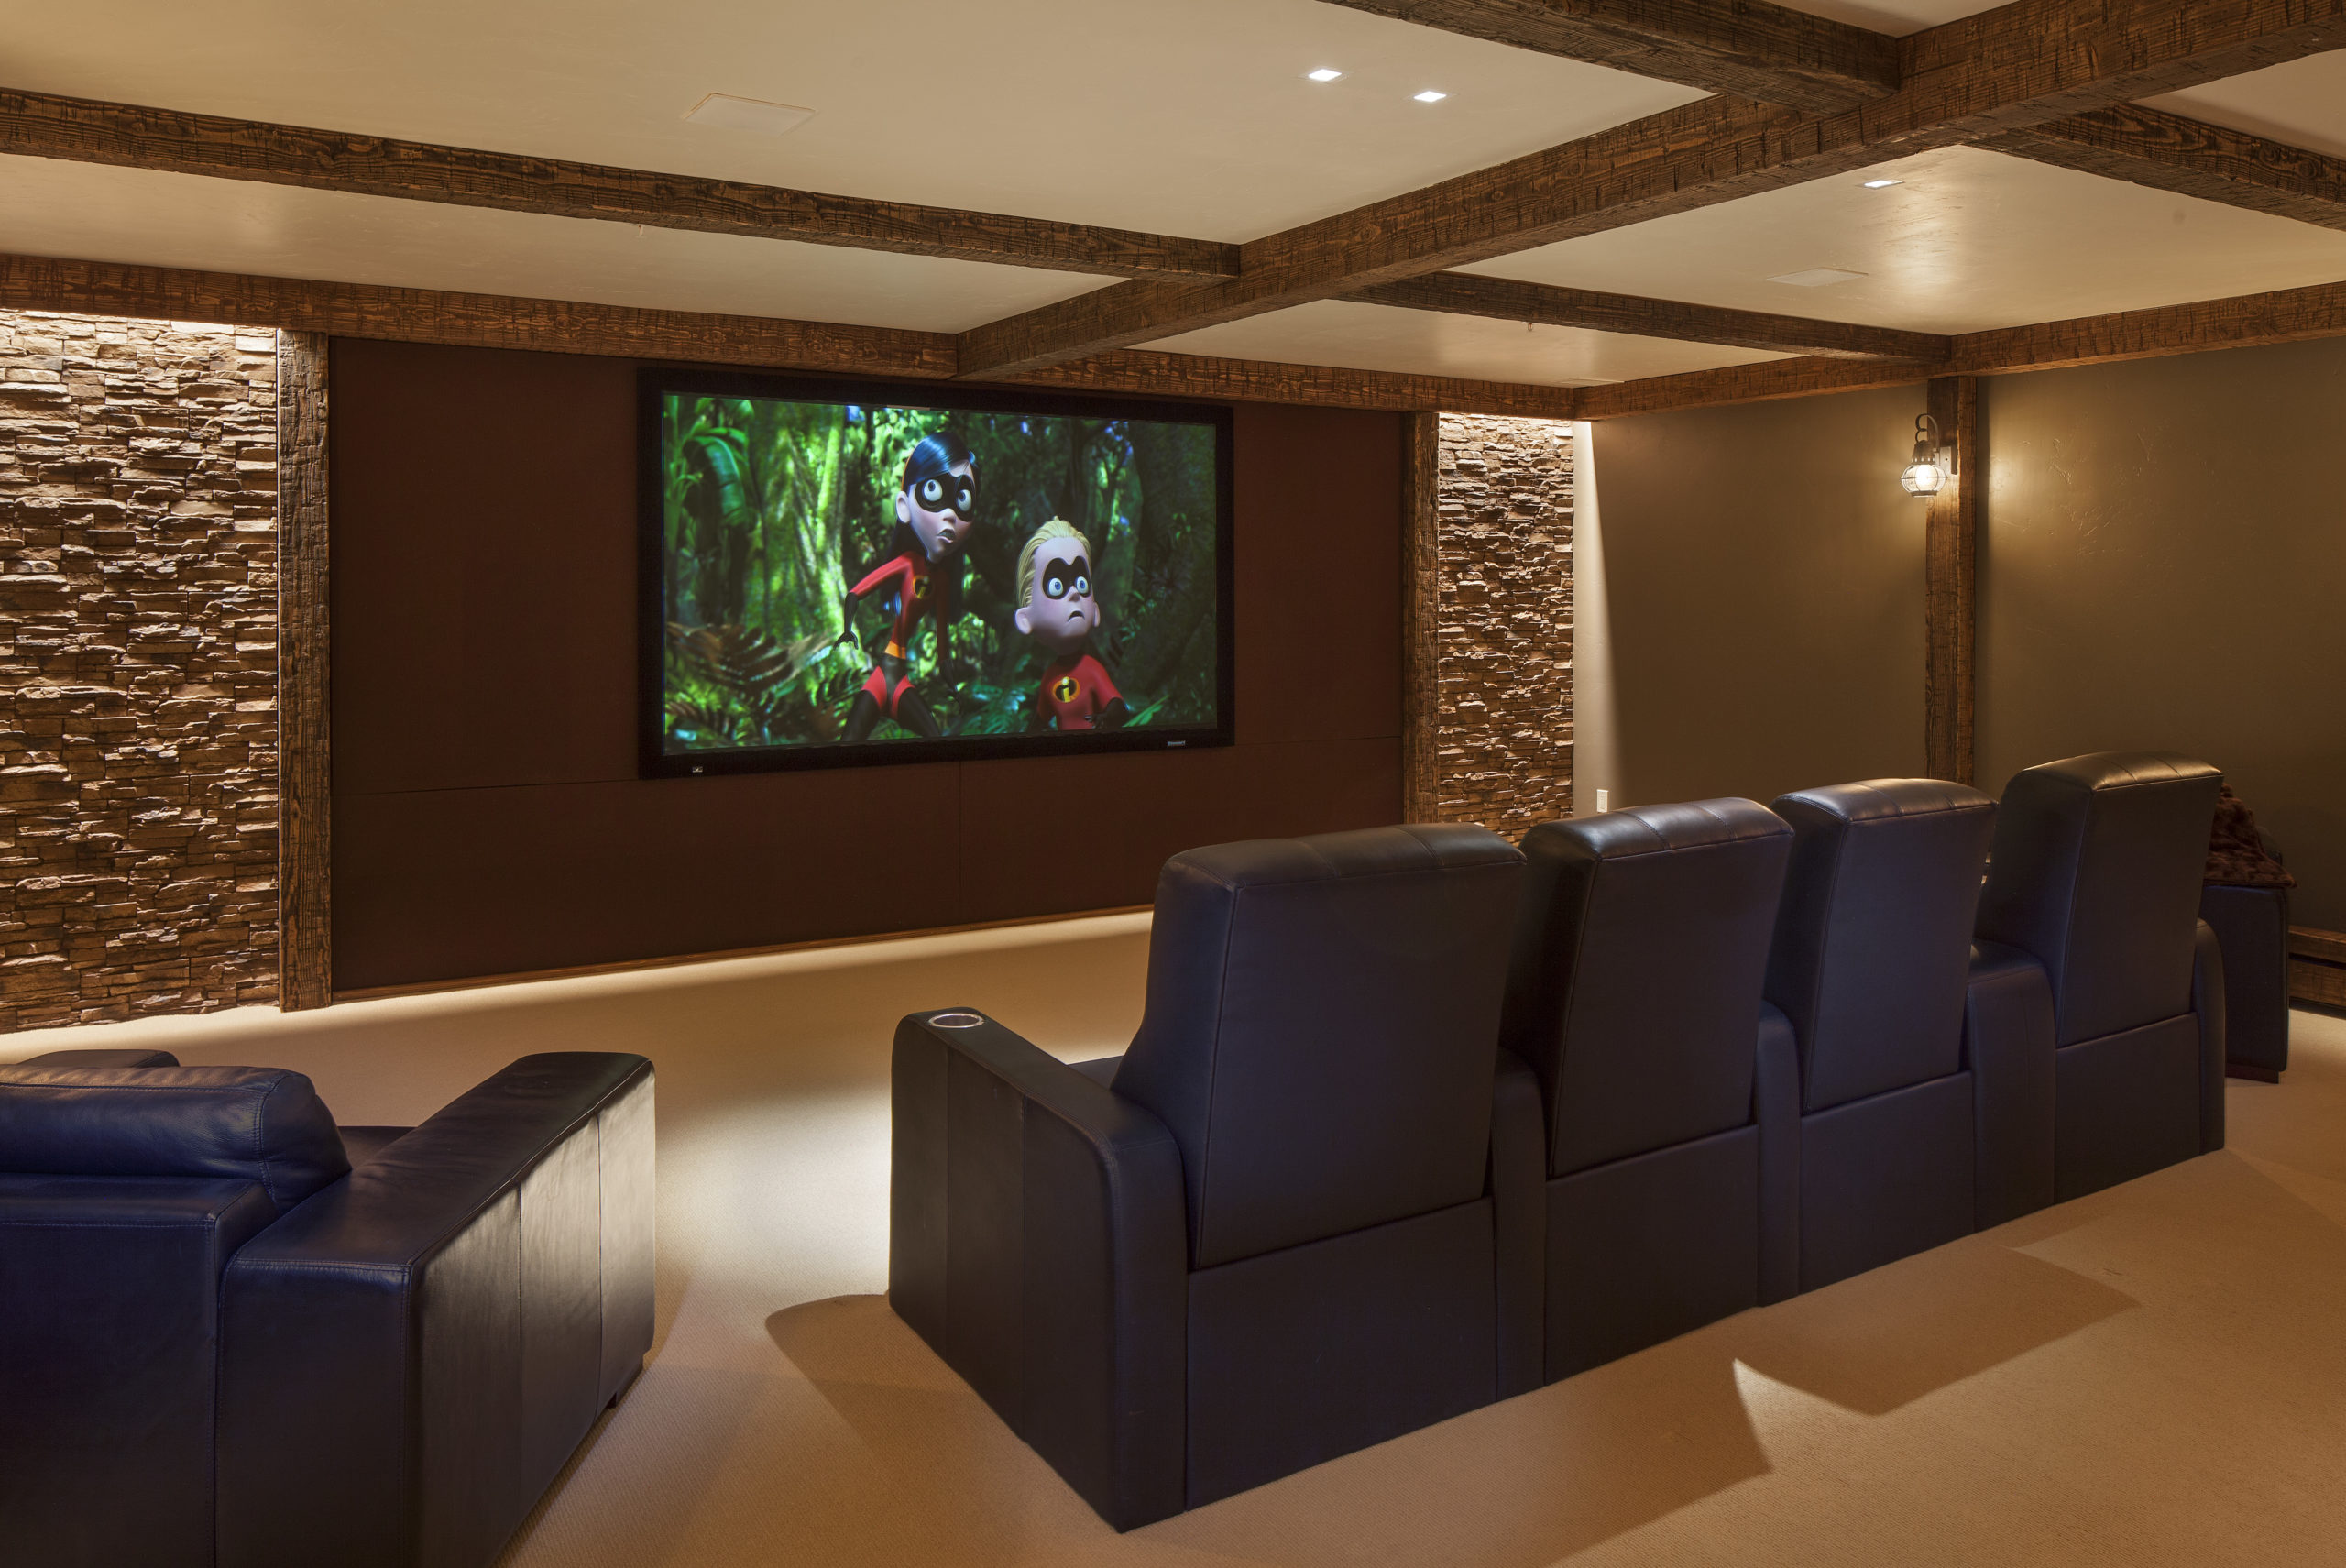 Home Theater Room Design: Bring The Magic Of Movies To Your Home